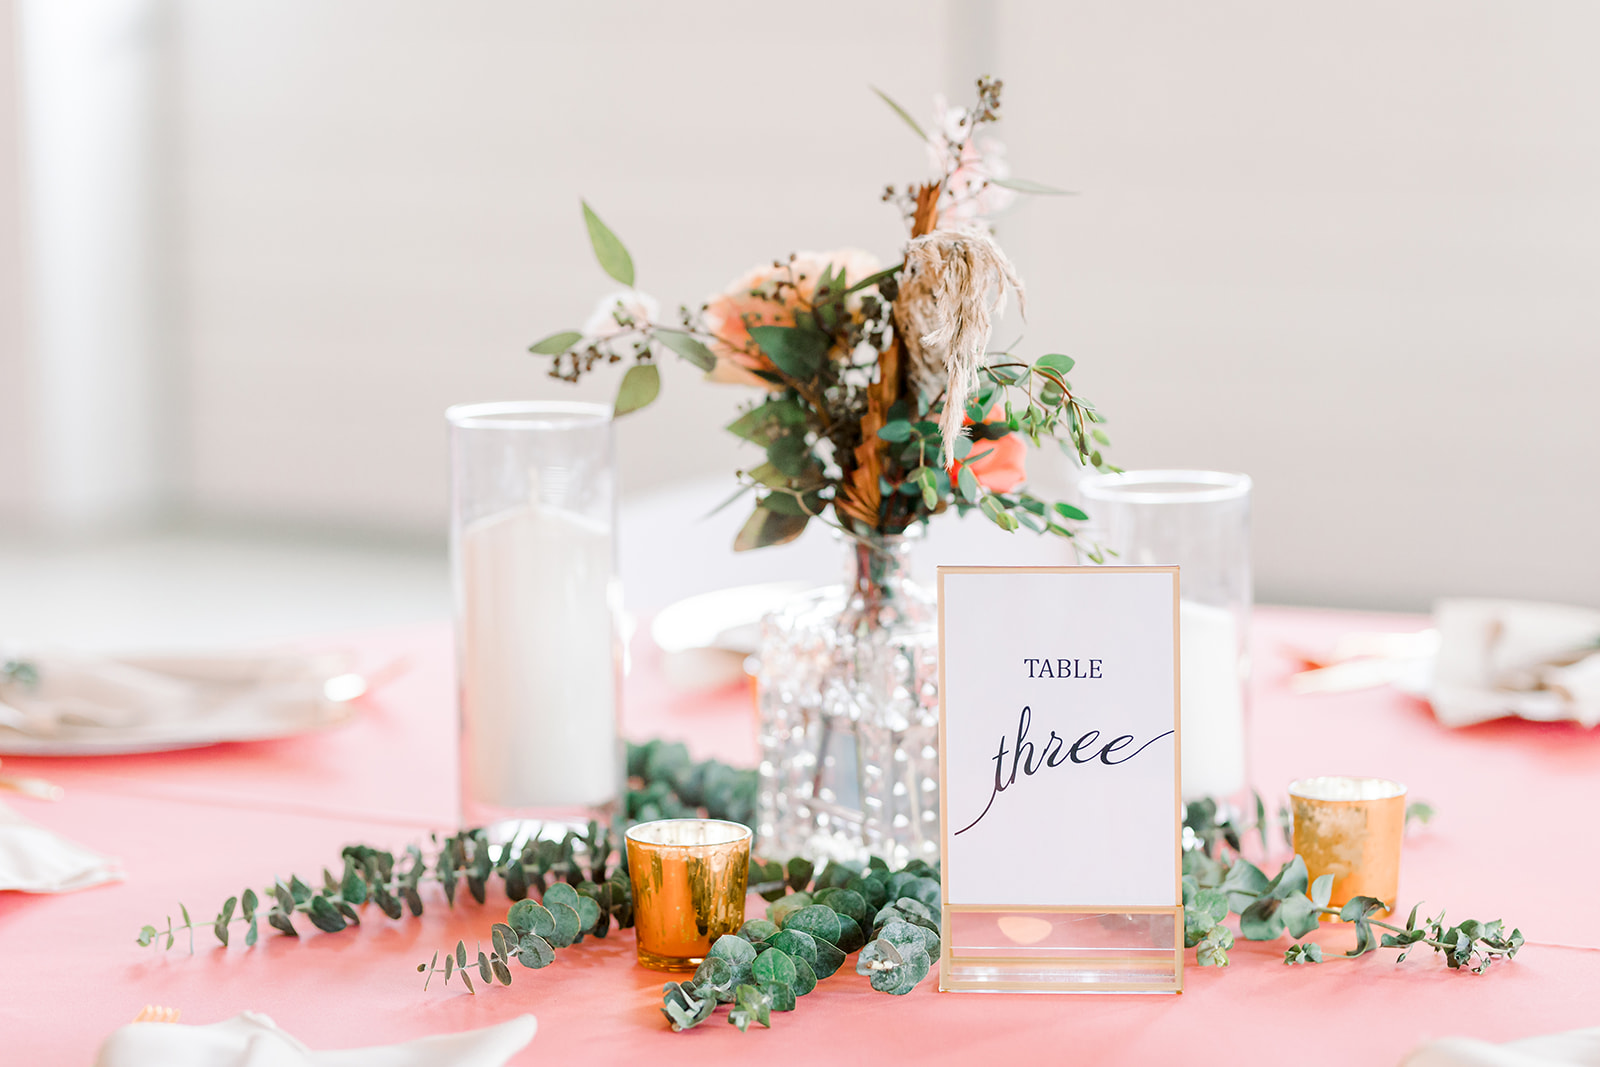 Wedding table decor with bright colors and bohemian vibes